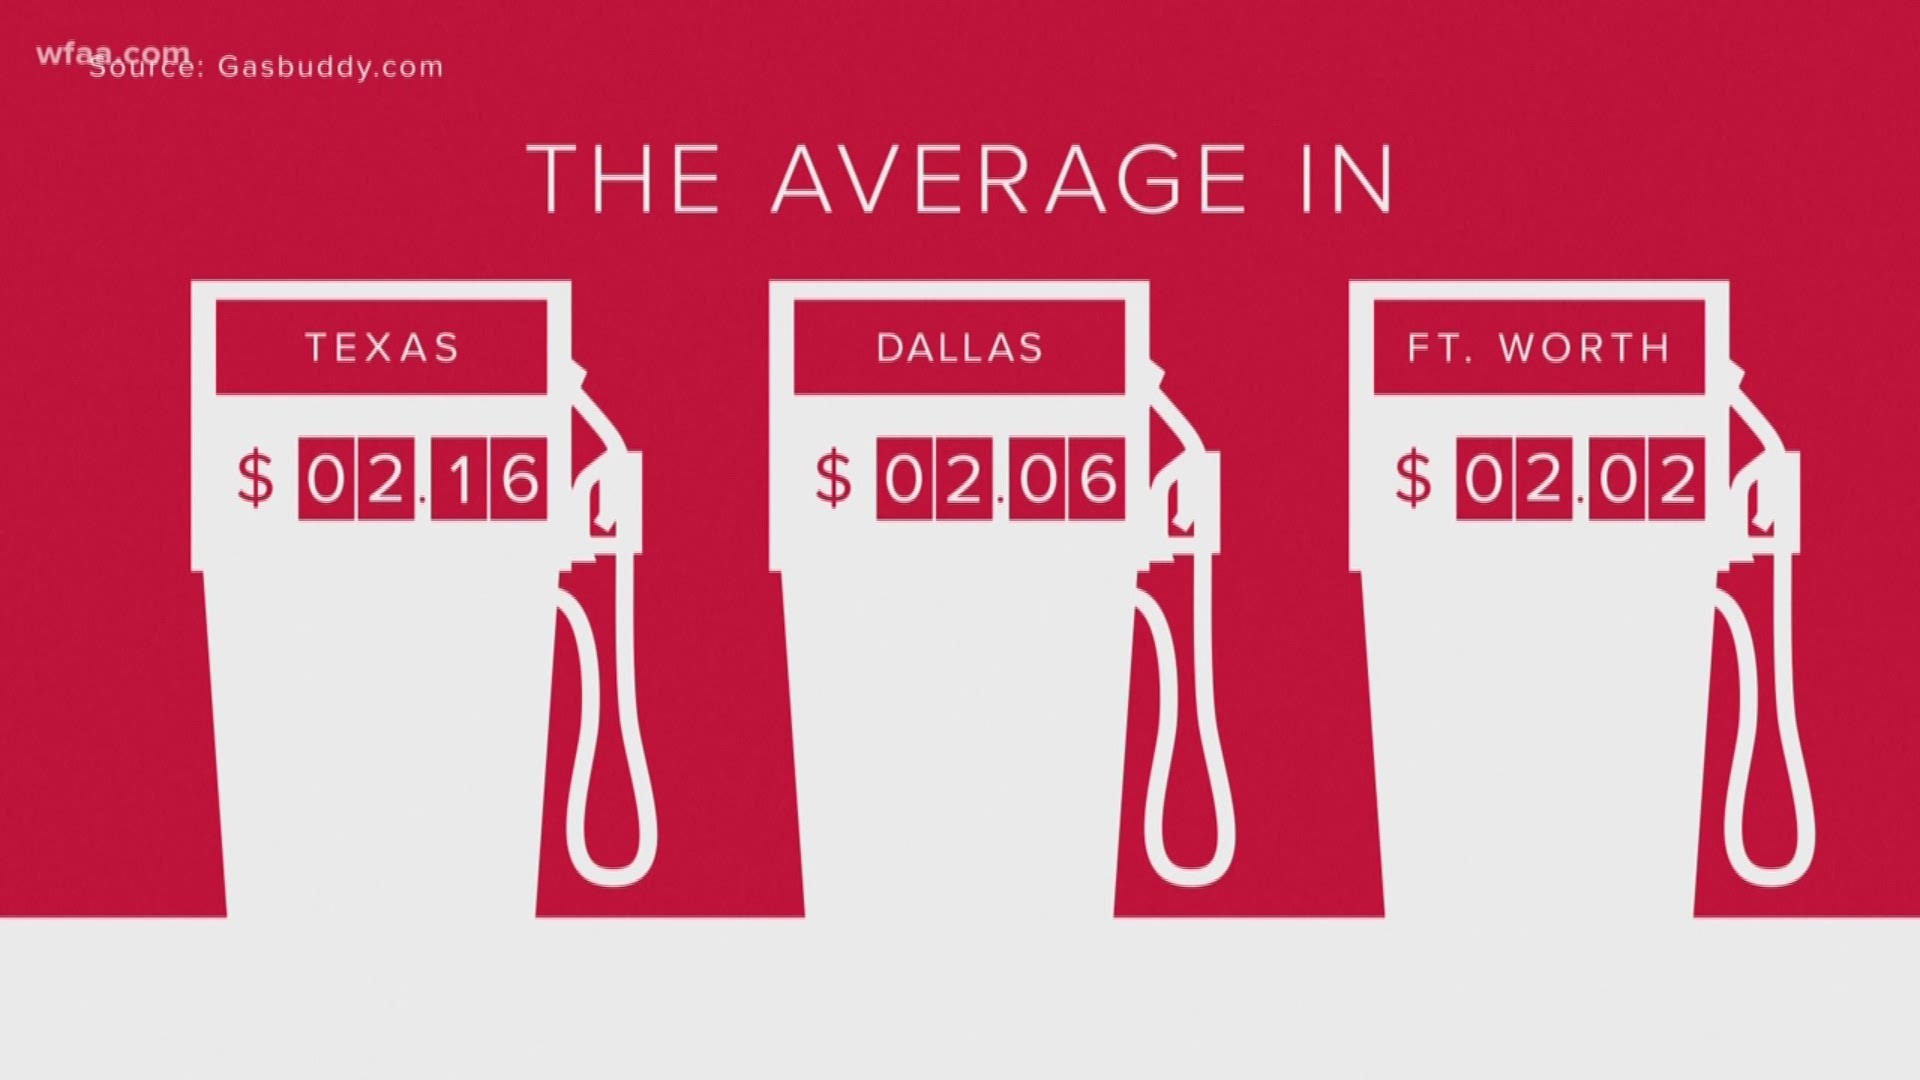 Cheapest gas prices of 2018 are in Texas